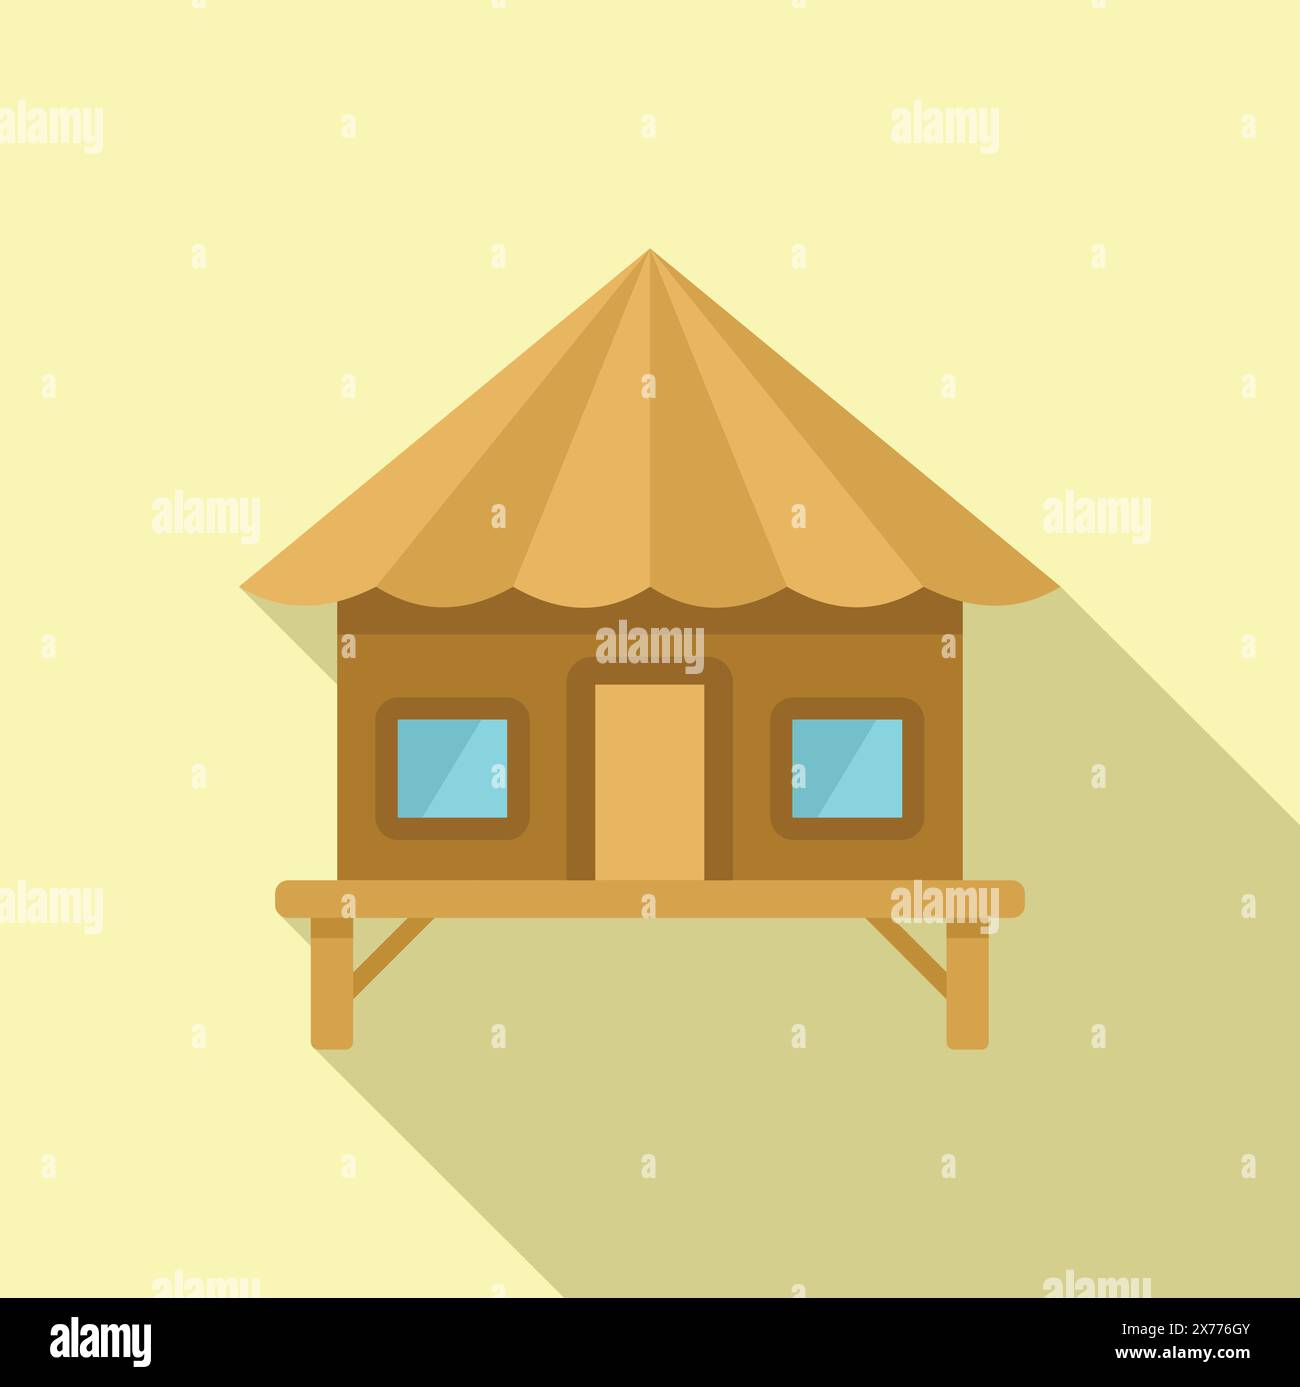 Illustration of a cartoon glamping tent with luxury camping accommodation in a modern, ecofriendly, and sustainable design, set against a tranquil outdoor nature background Stock Vector